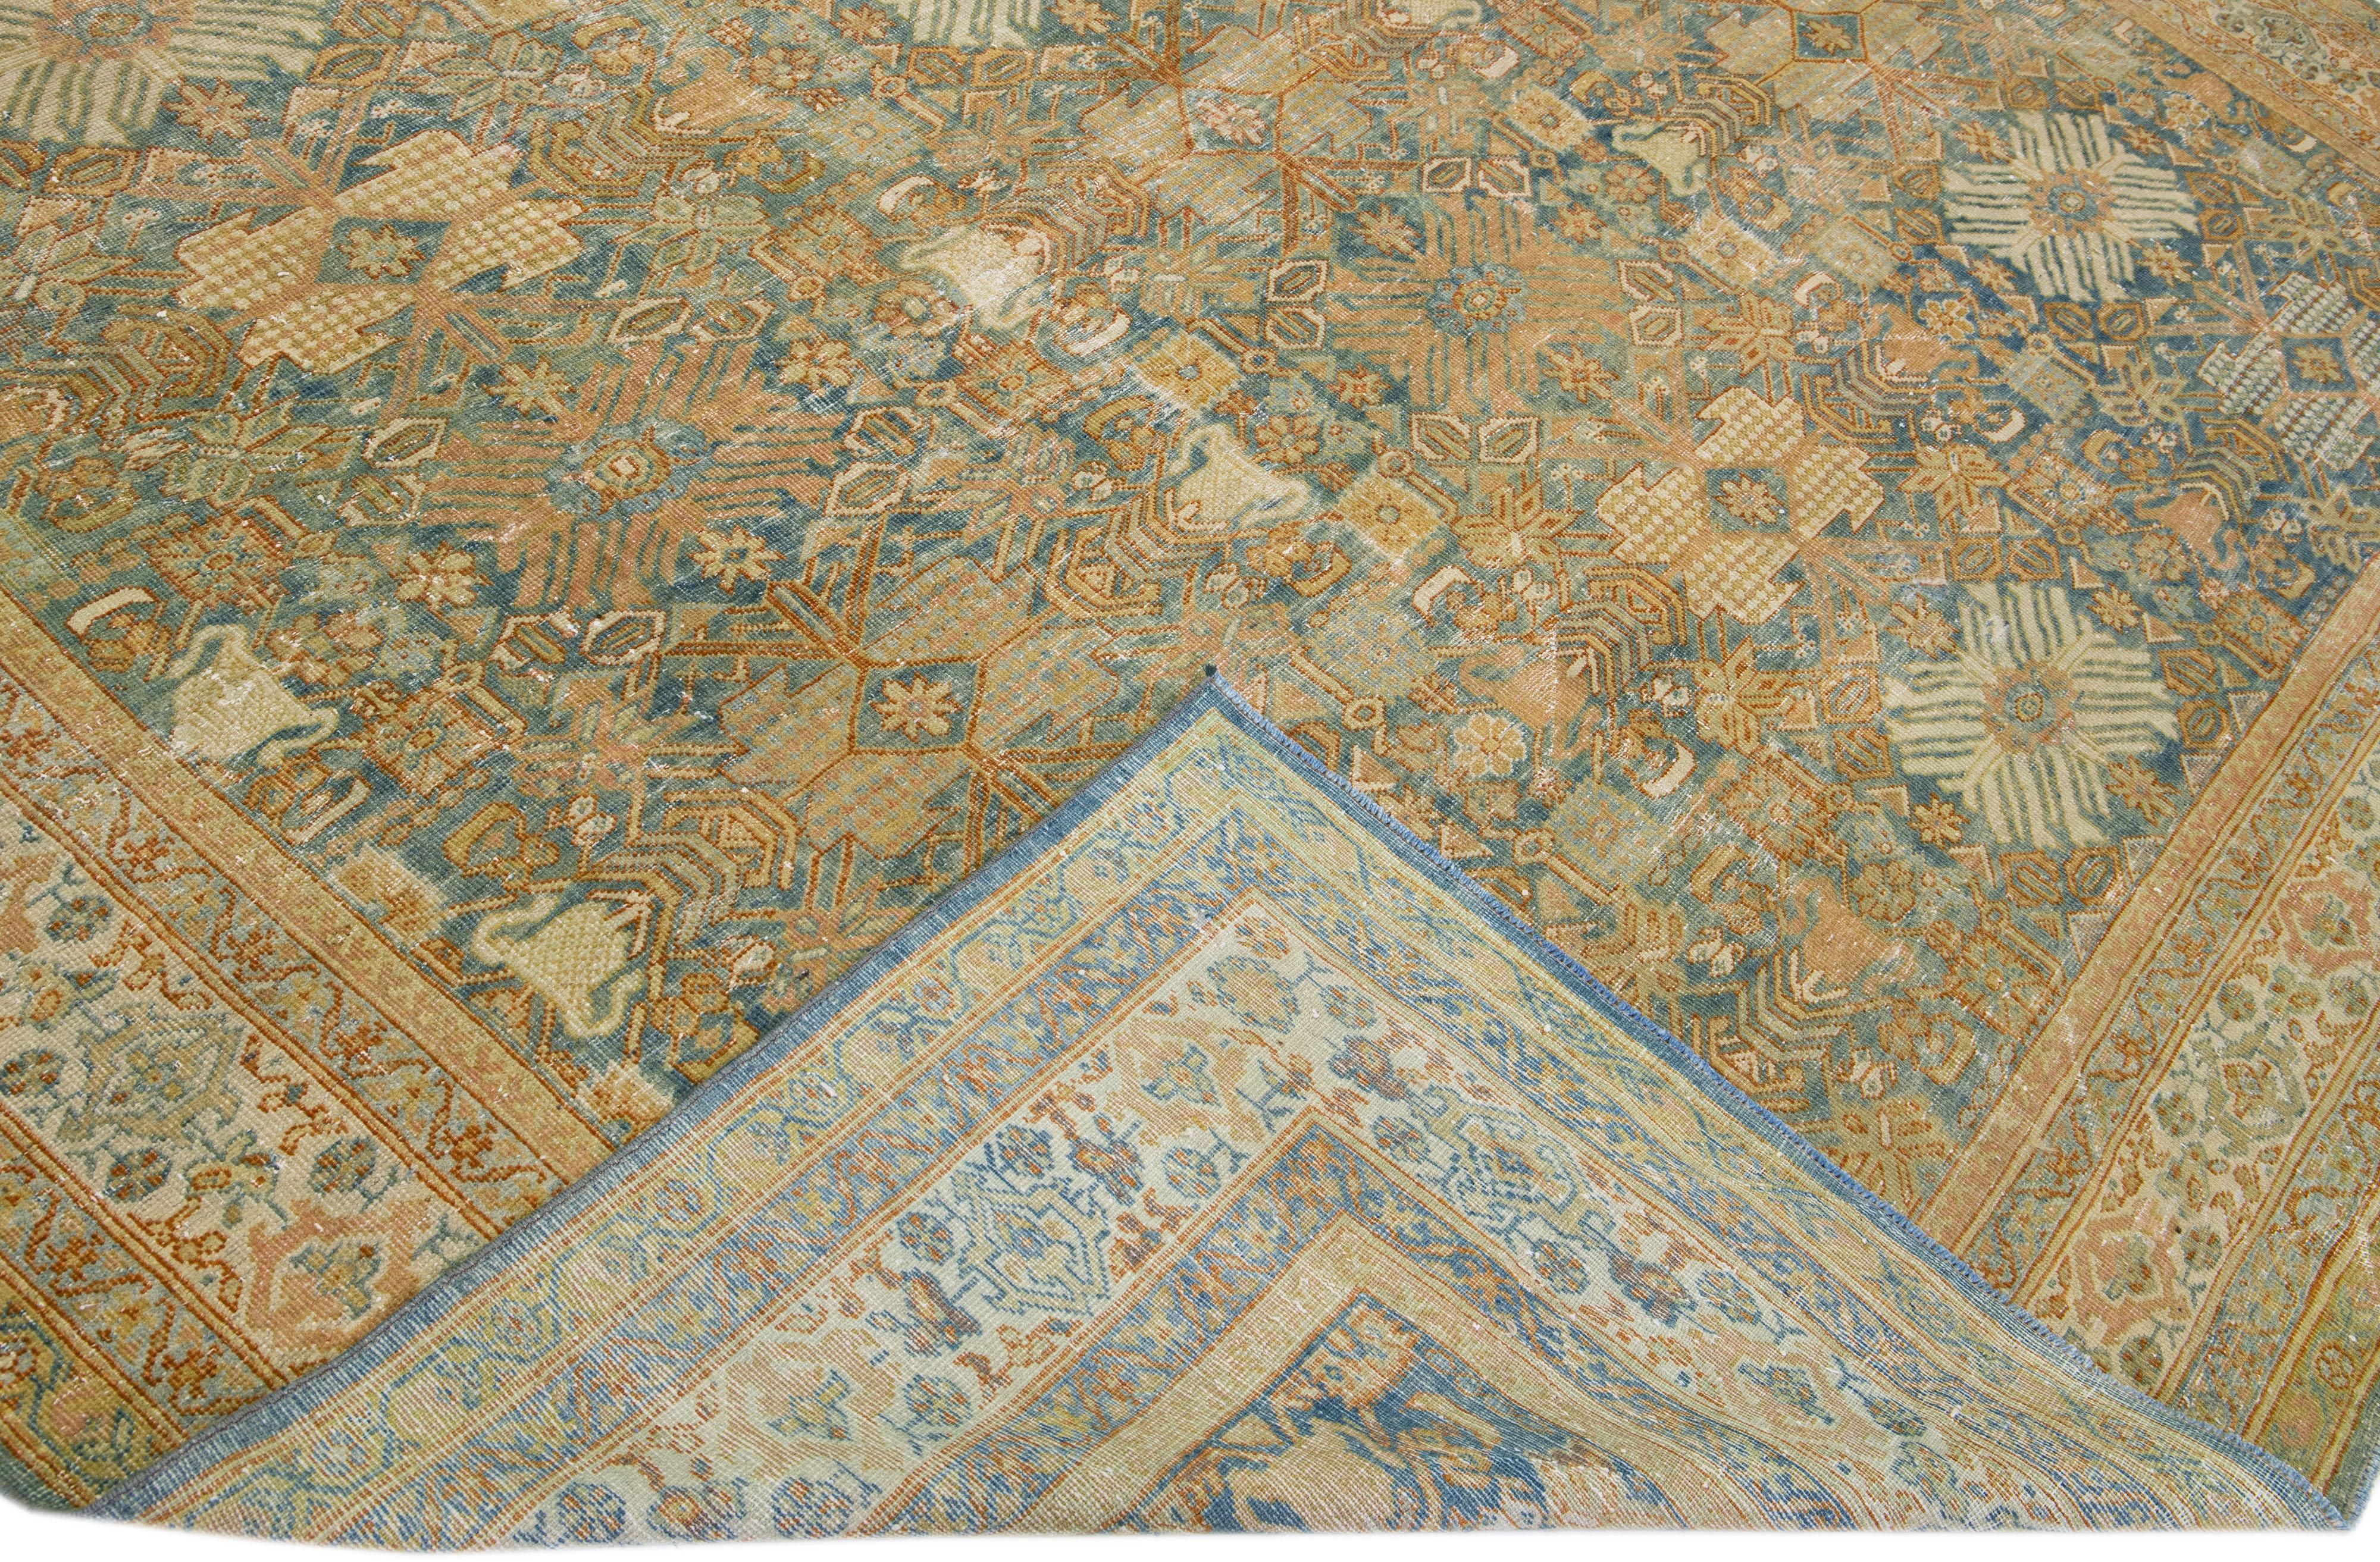 A beautiful Antique Mahal hand-knotted wool rug with a blue & rust-orange color field. This Persian rug has beige accents in an all-over floral design.

This rug measures 9'10